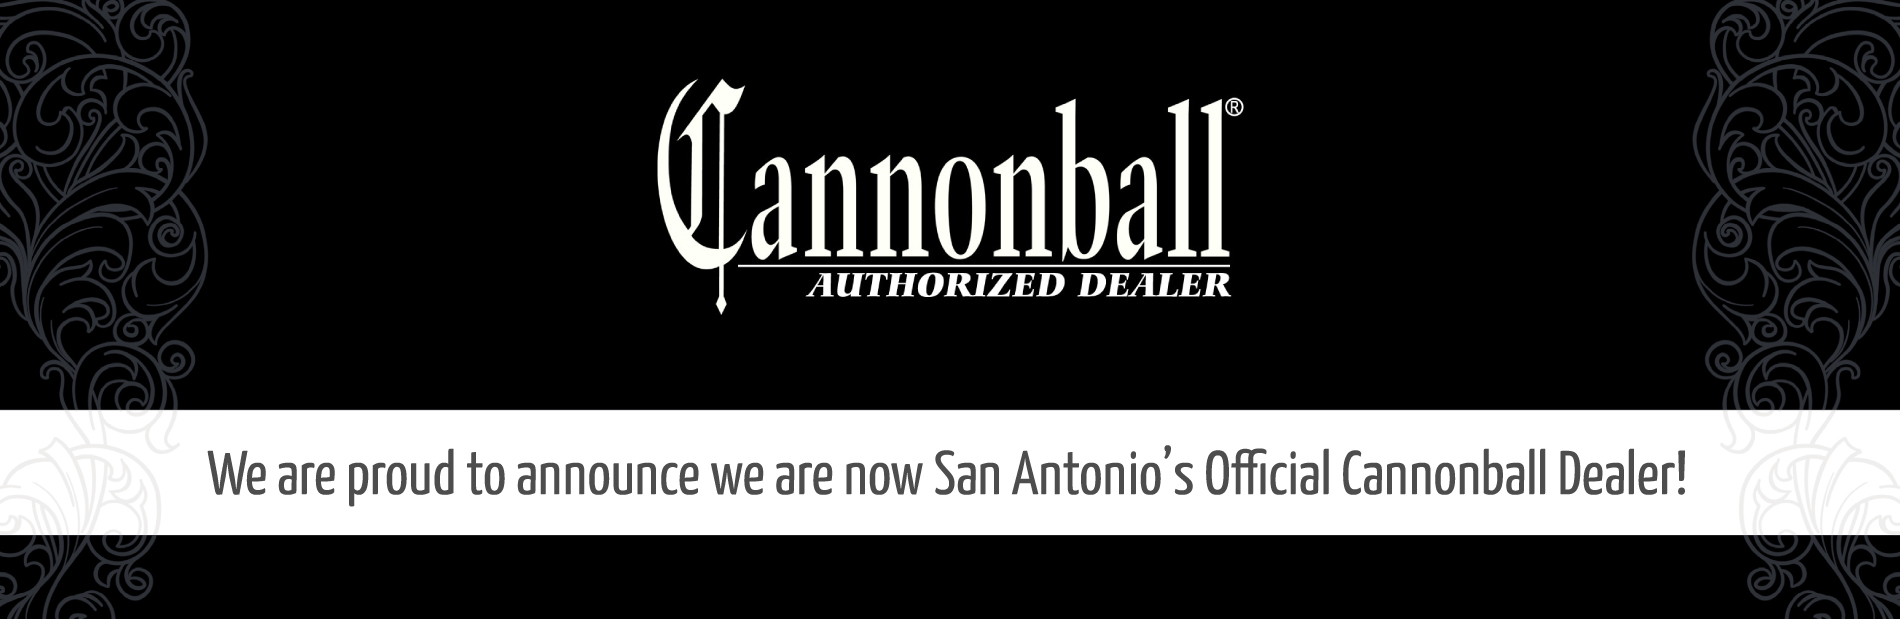 Cannonball musical instruments coming soon